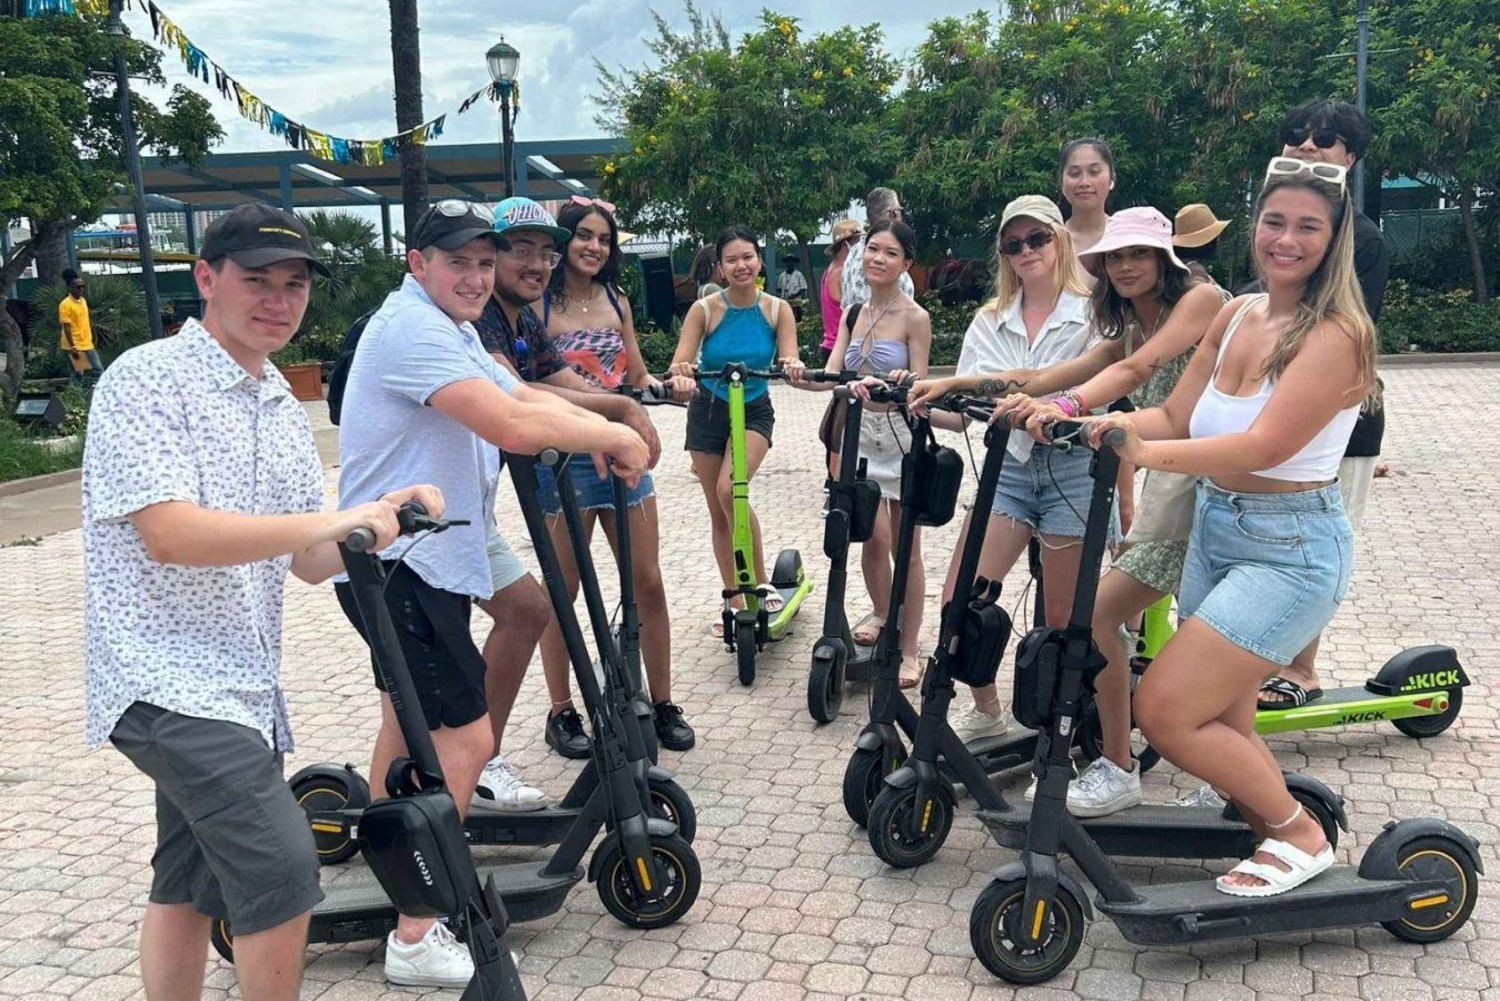 Nassau: E-Scooter Tour with Food Tasting and Local Drinks